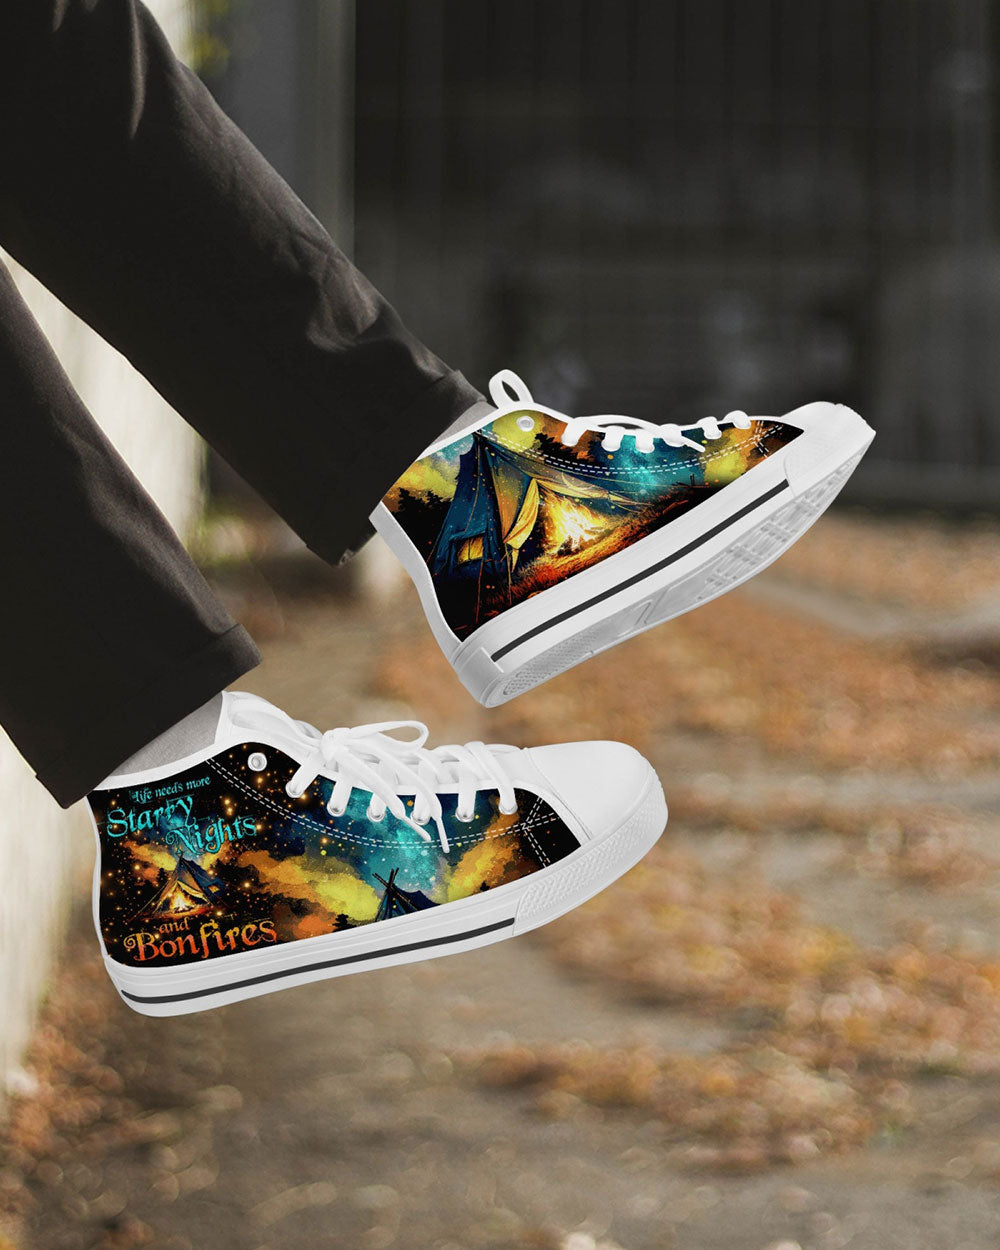 LIFE NEEDS MORE STARRY NIGHTS AND BONFIRES HIGH TOP SHOES - TYTD2404235